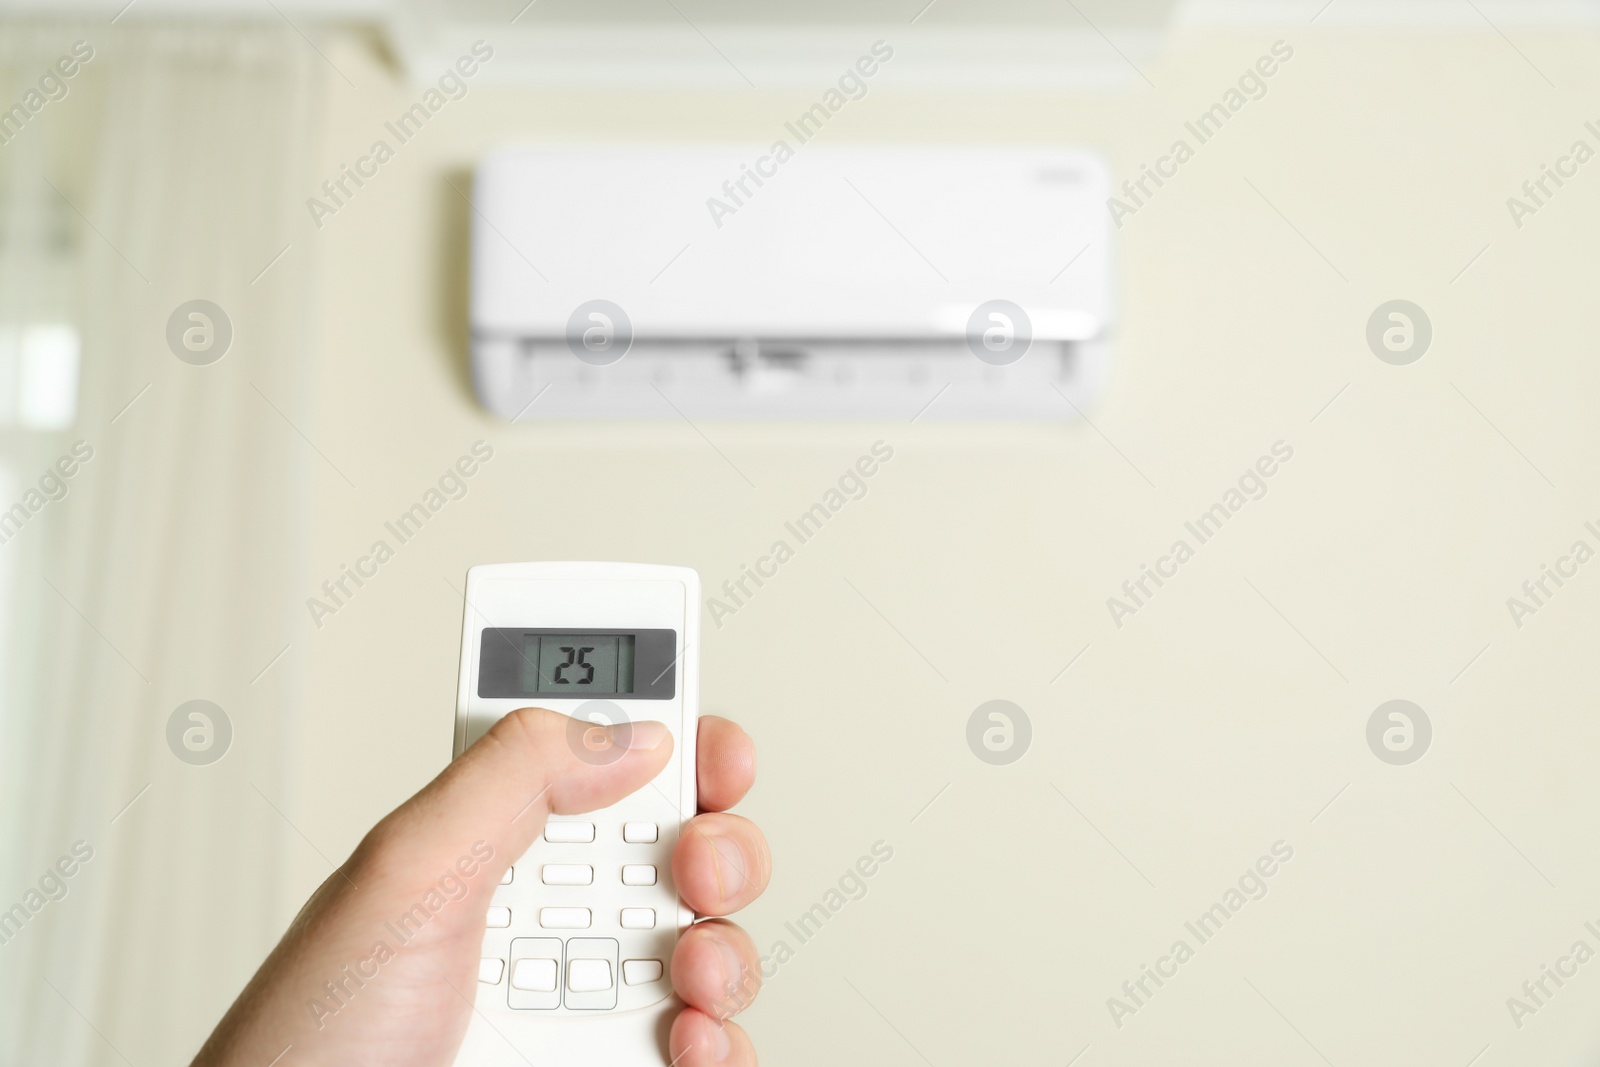 Photo of Man operating air conditioner with remote control indoors, closeup